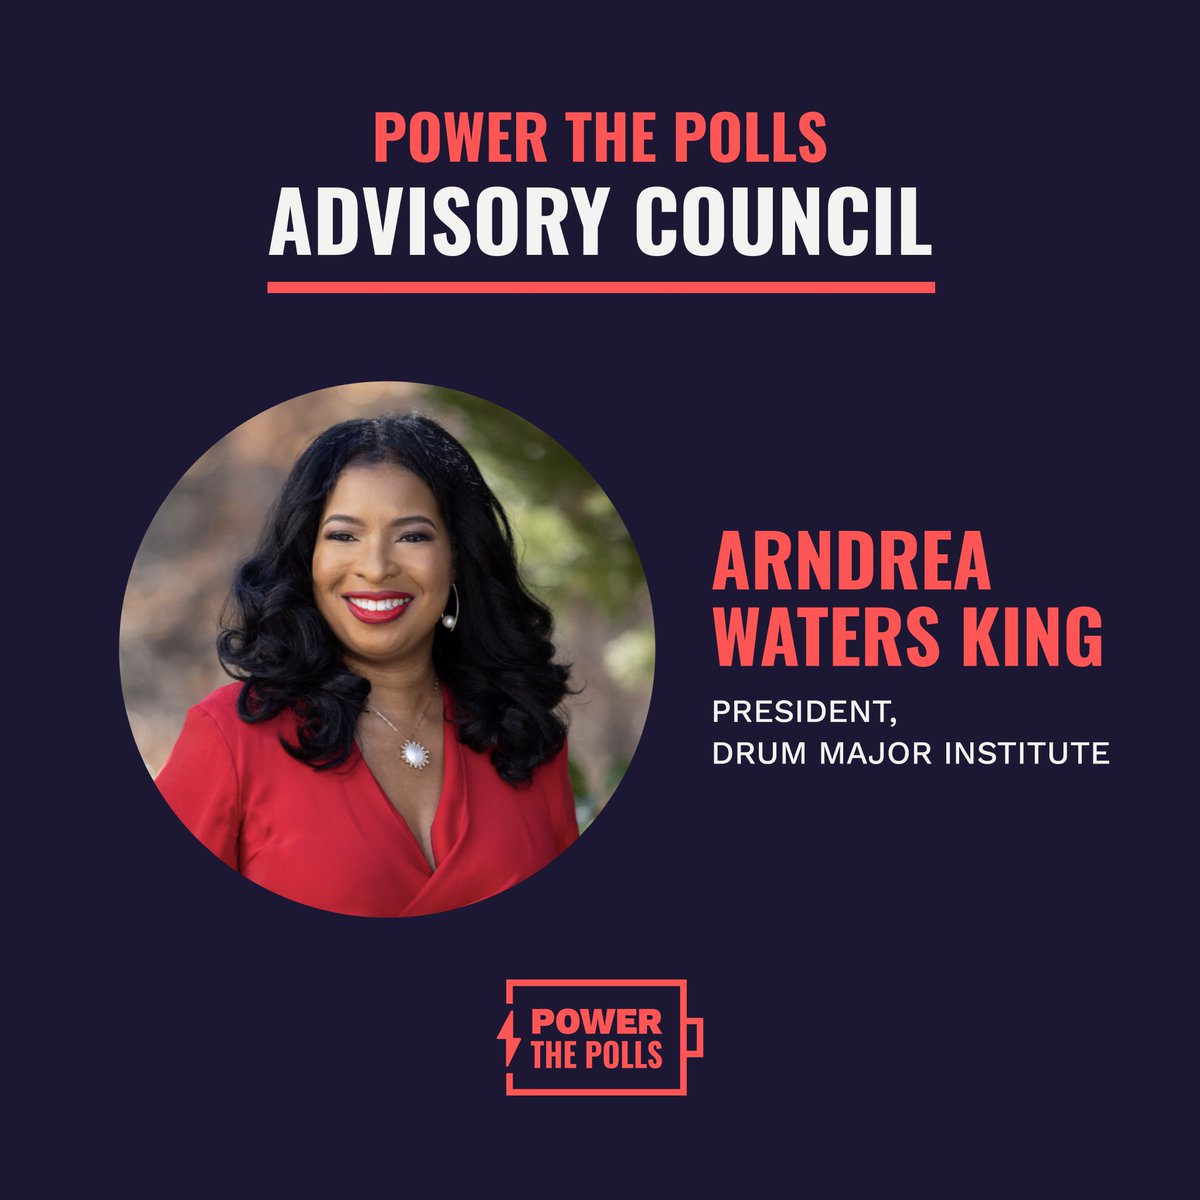 DMI is proud to share that our president, @ArndreaKing, has joined the @PowerThePolls initiative, to support their efforts to protect poll workers who fuel our elections.